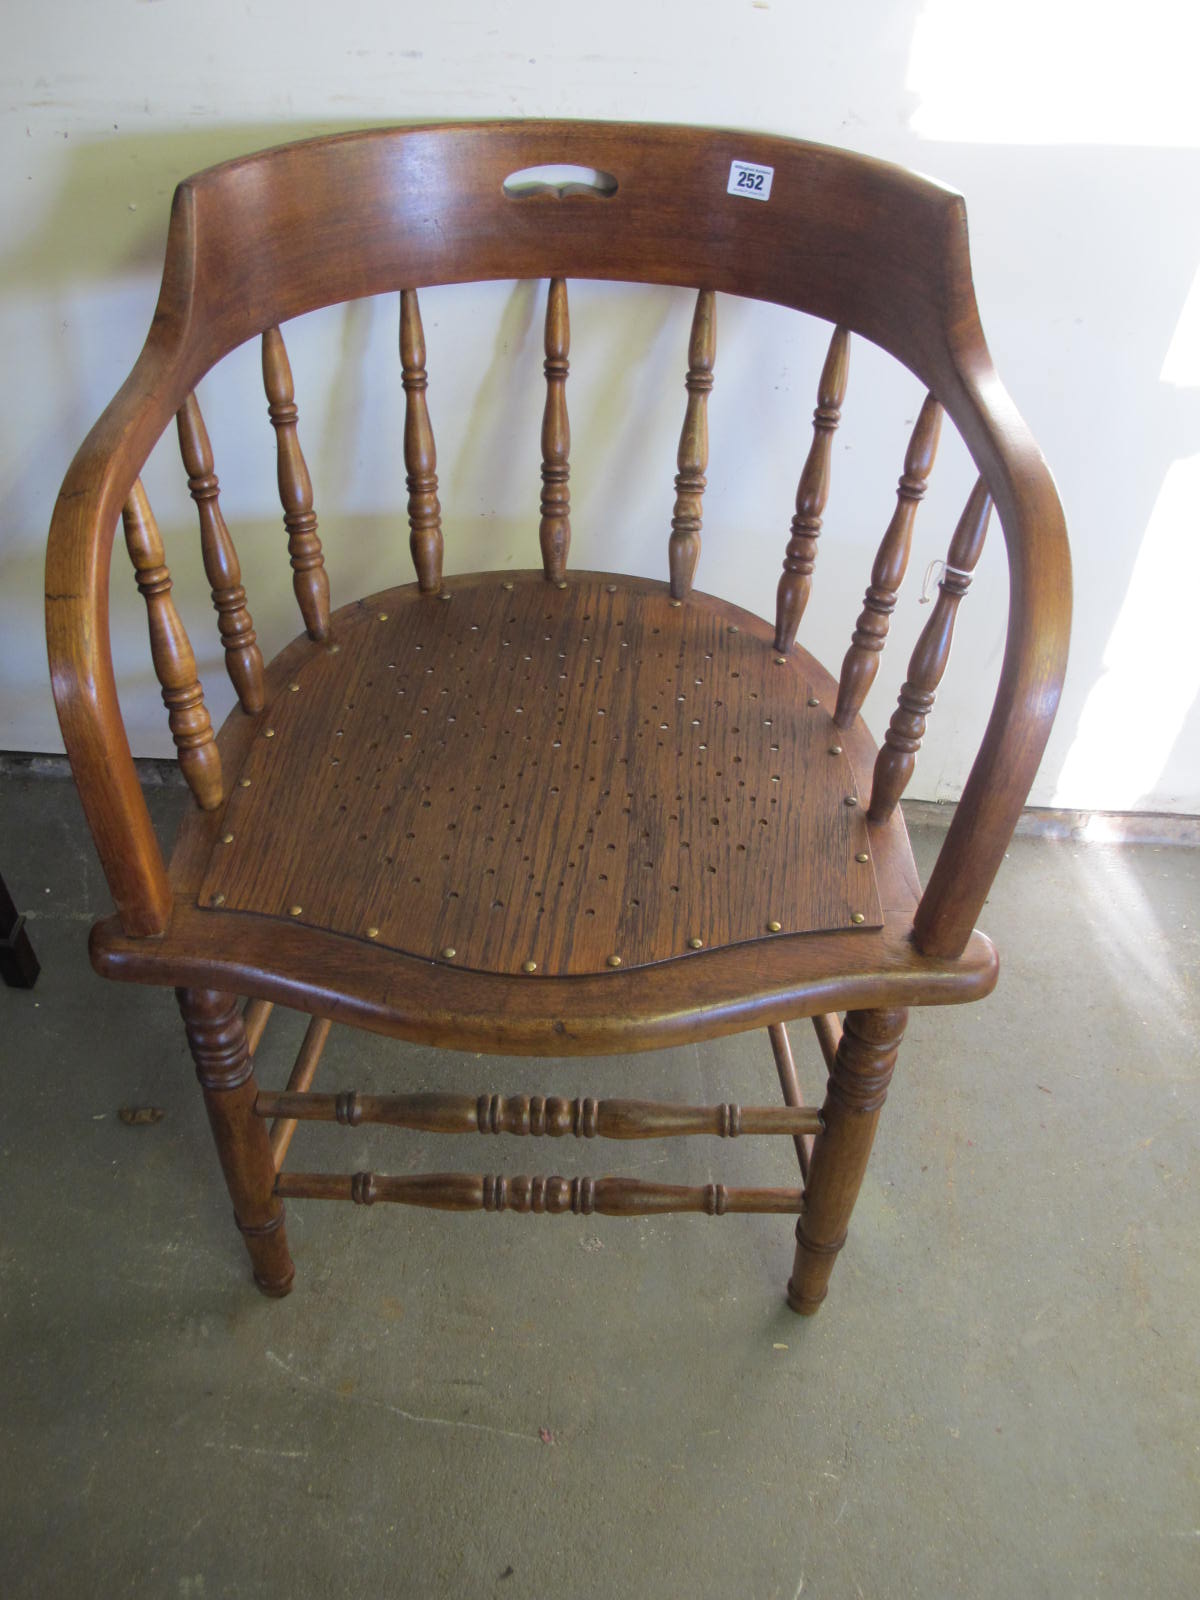 An early 20th century beechwood spindle back desk chair